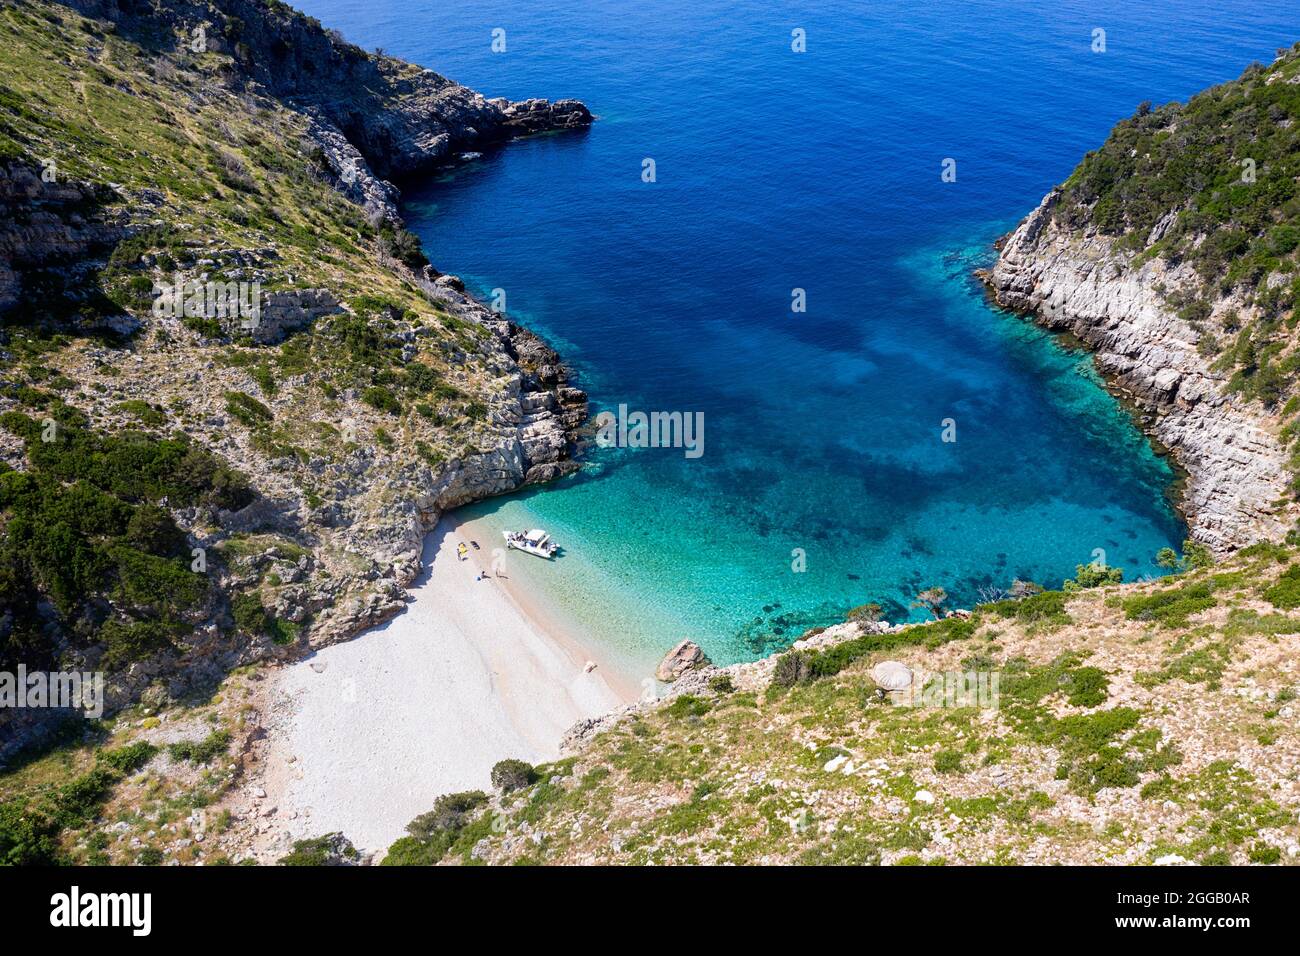 Aerial view of spectacular beach on a isolated karaburun peninsula and tourists, exploring it by speedboat, albania Stock Photo